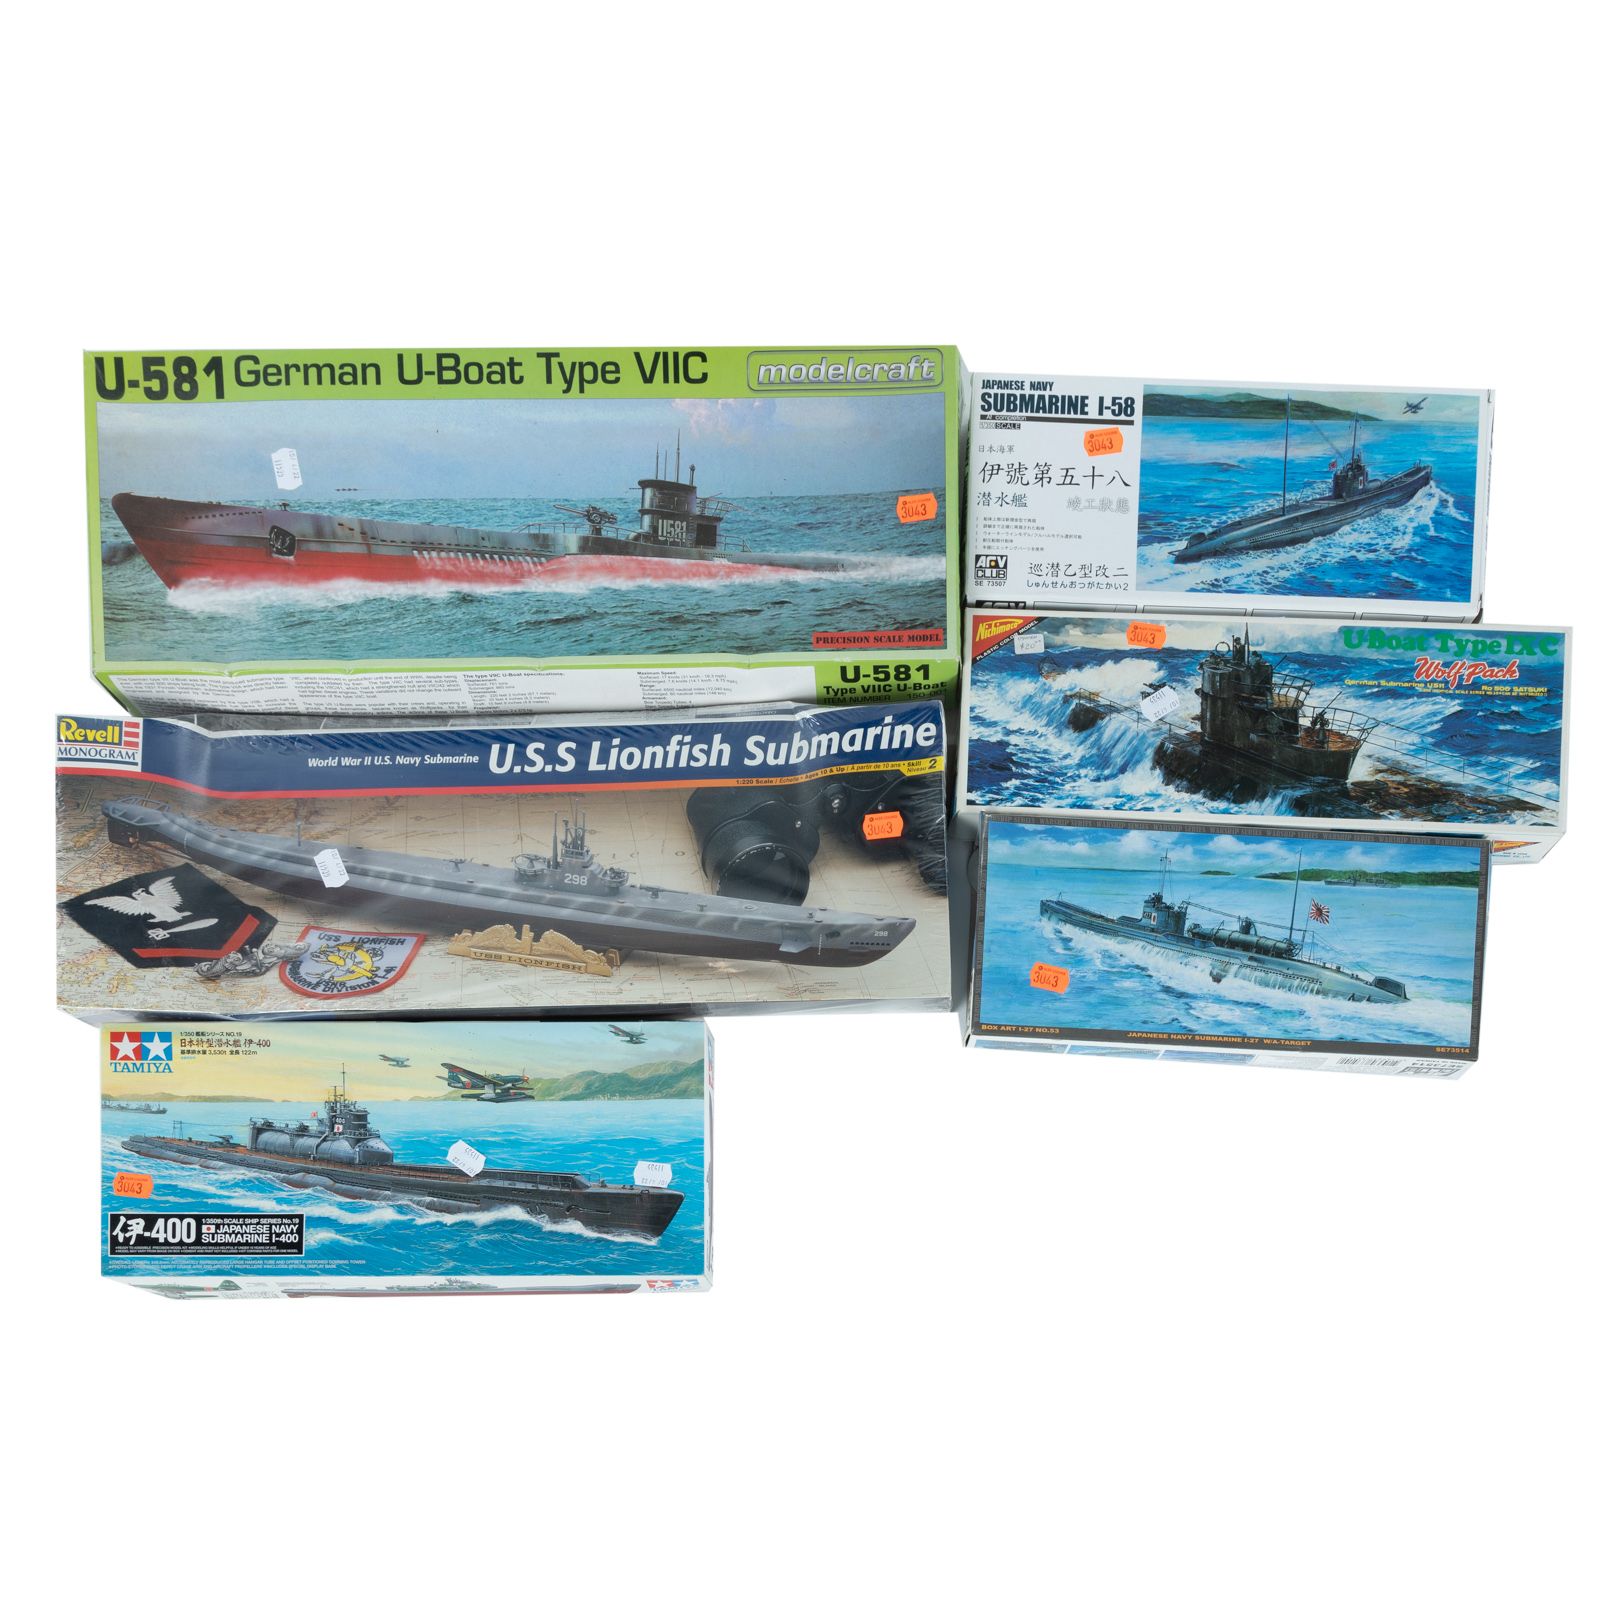 SIX WWII SUBMARINE MODEL KITS All 36a04a